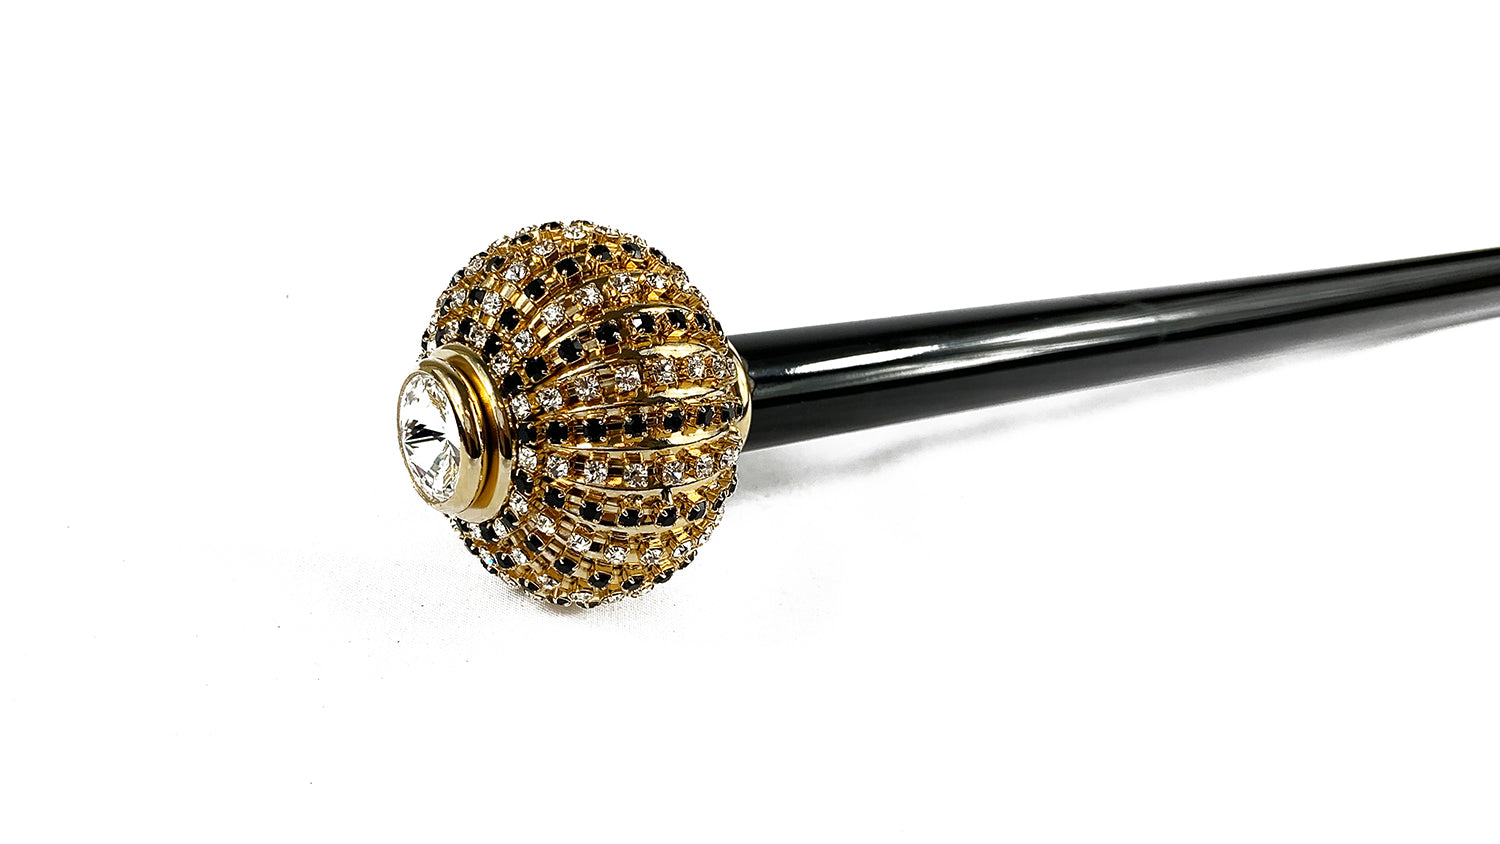 Walking stick with brass onion with black and white crystals